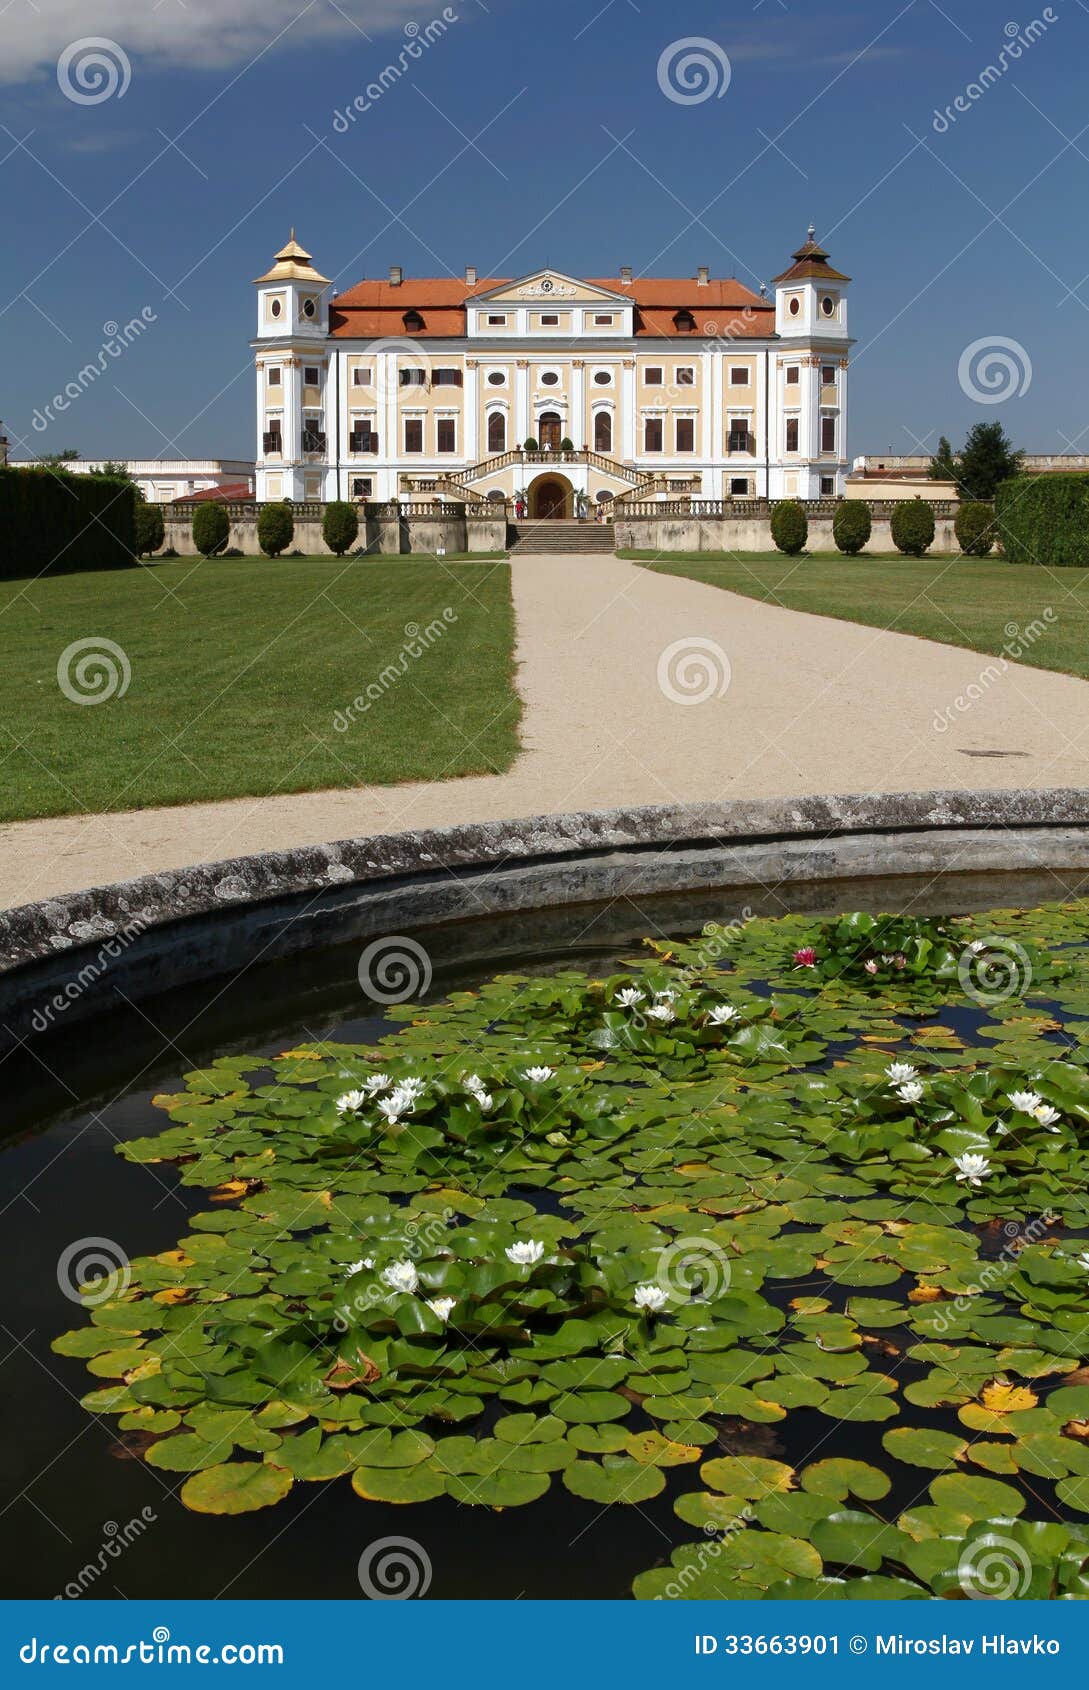 milotice and water lilies